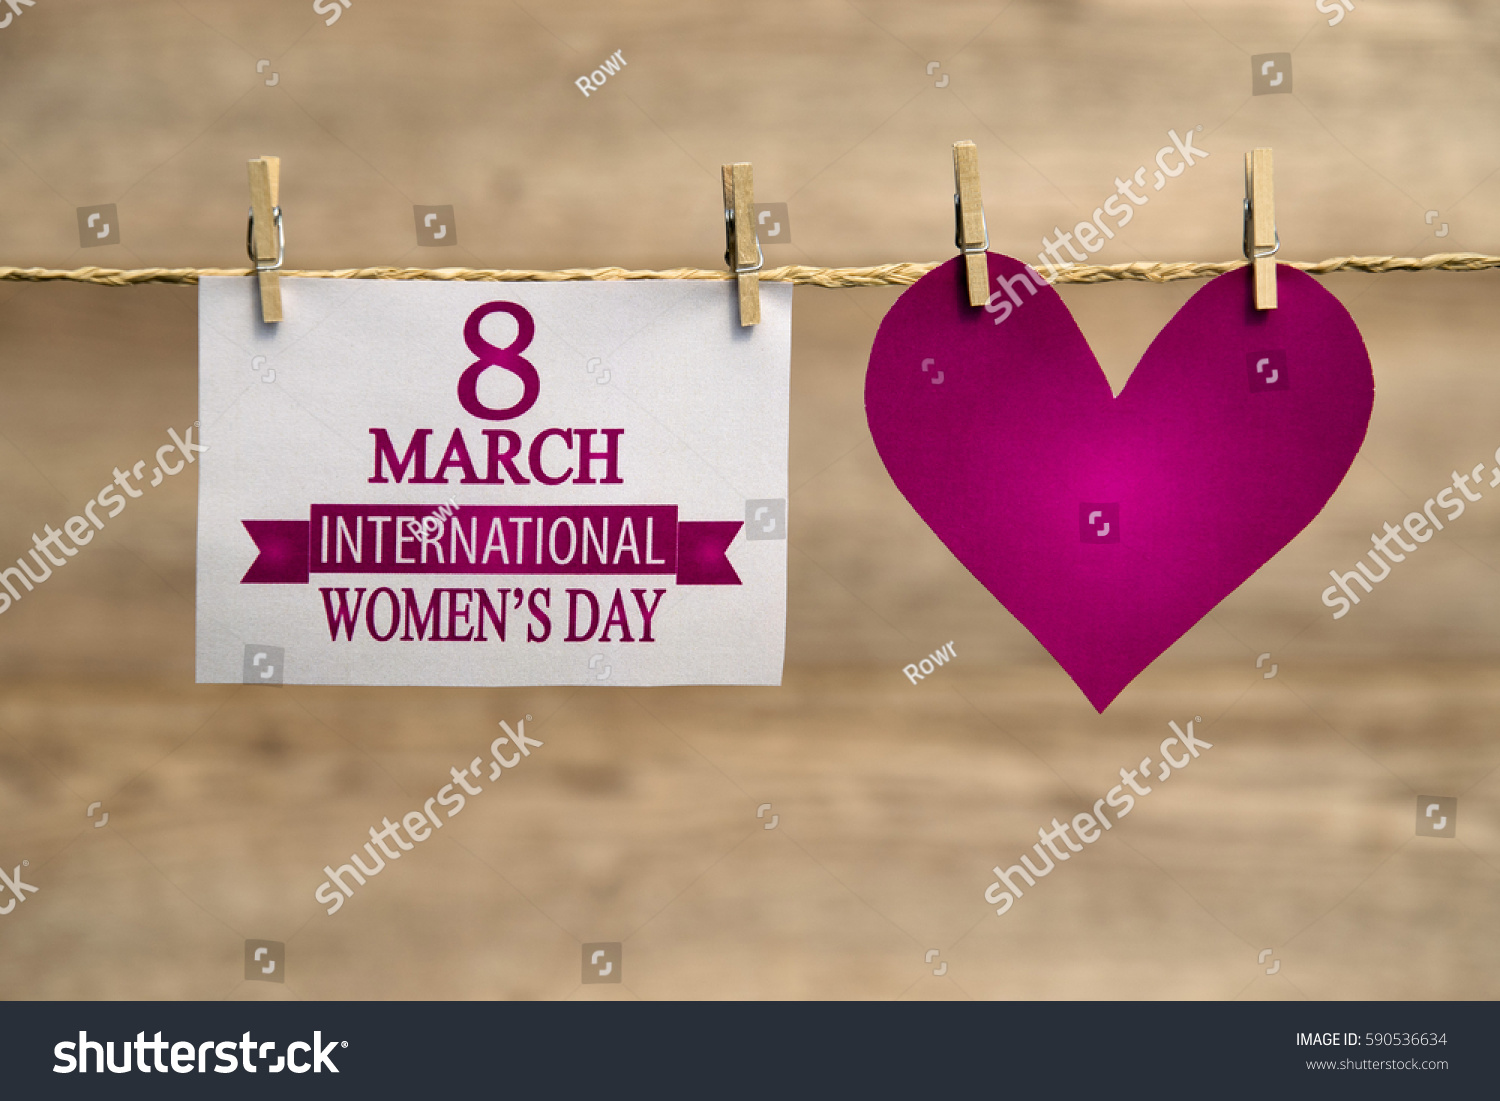 Women's day card or background. #590536634